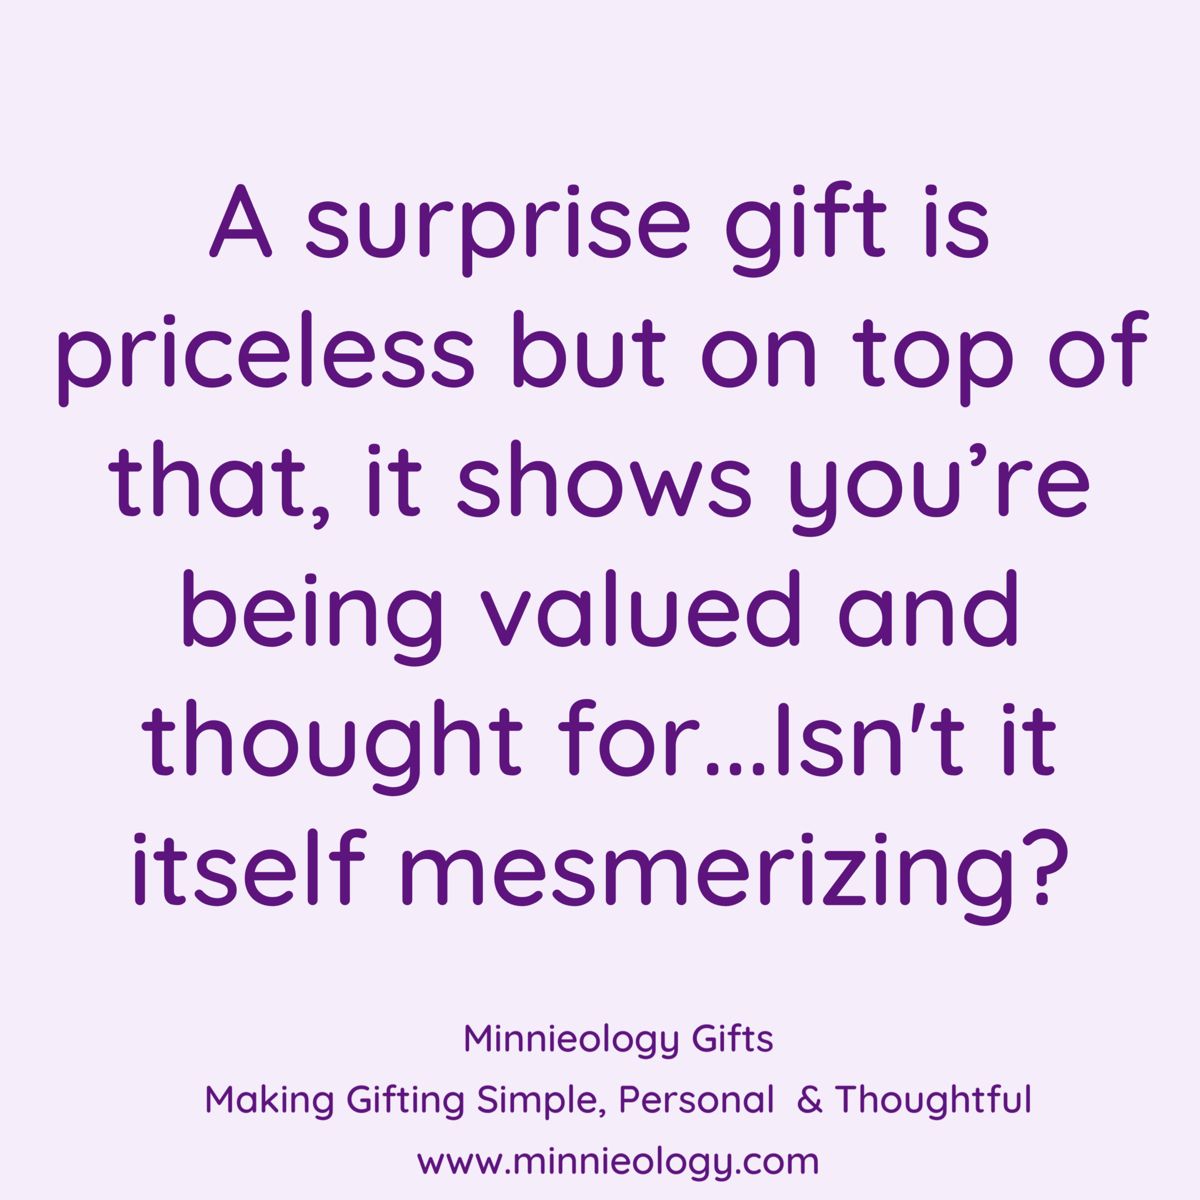 63 Beautiful Gift Quotes And Sayings